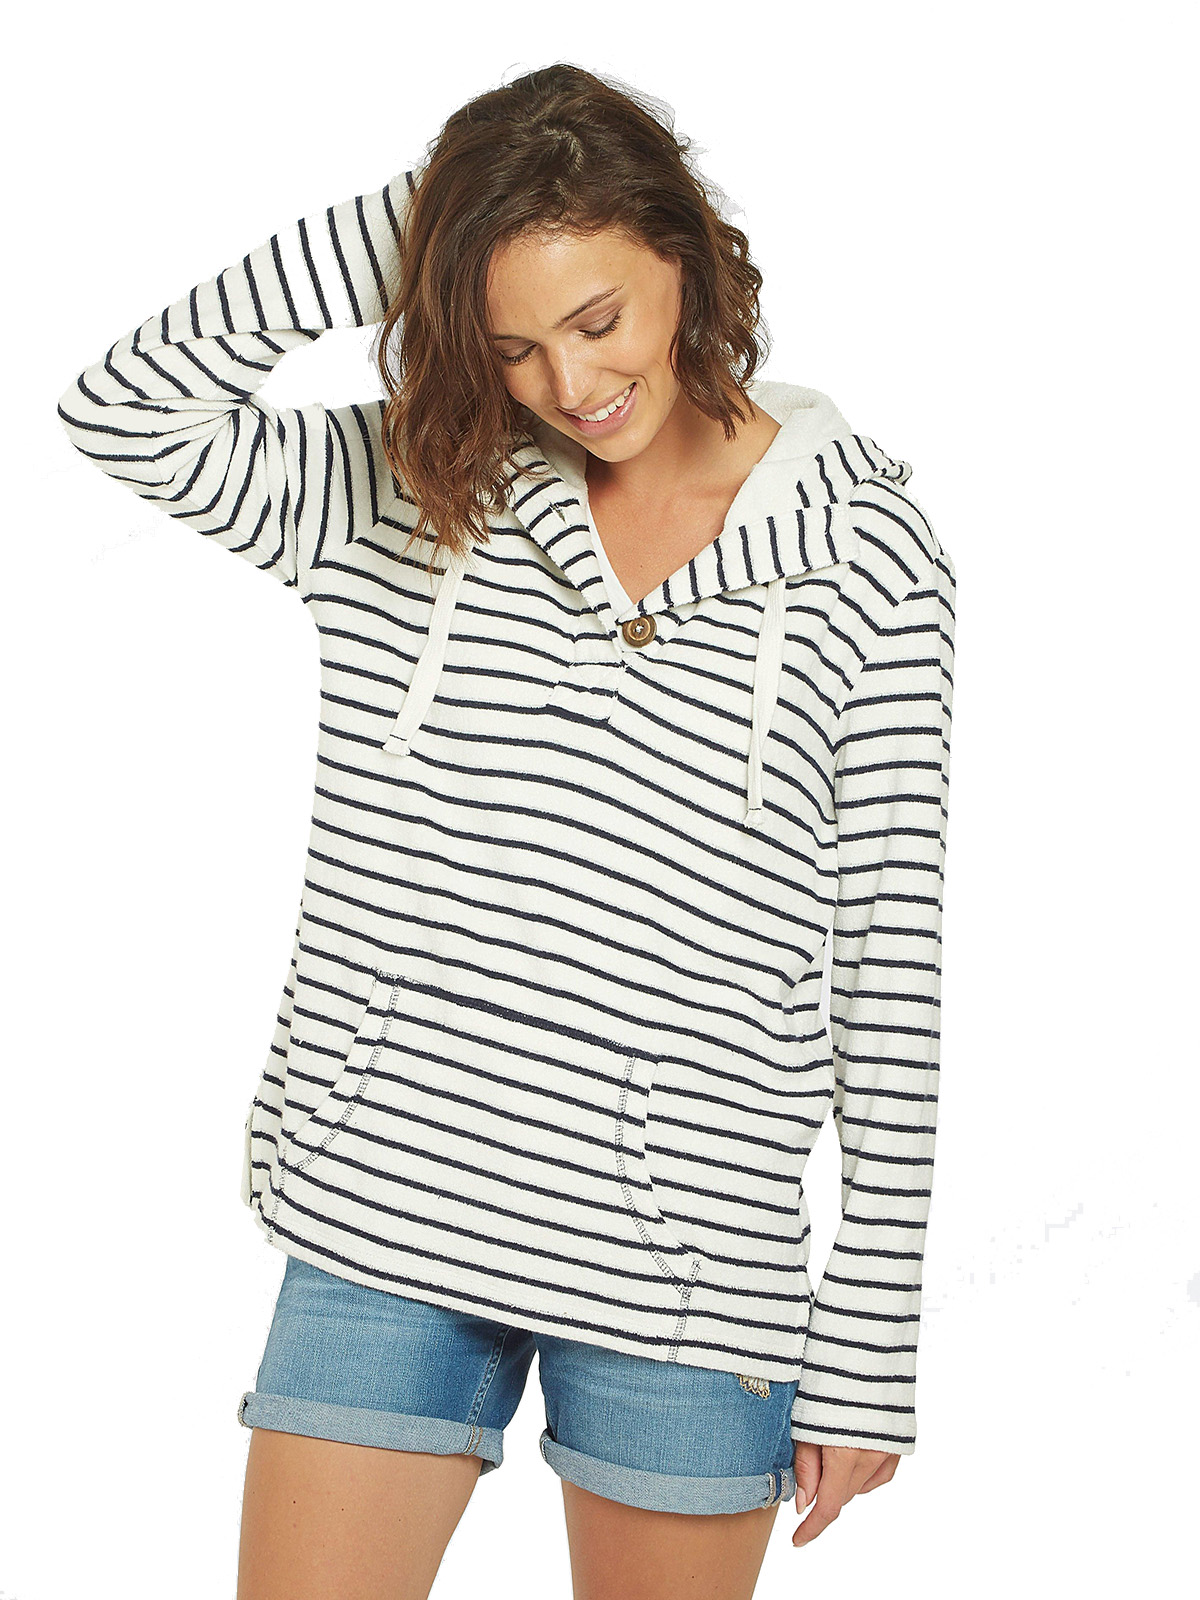 FAT FACE - - FatFace IVORY Stripe Whitstable Overhead Hoodie - Size 6 to 18